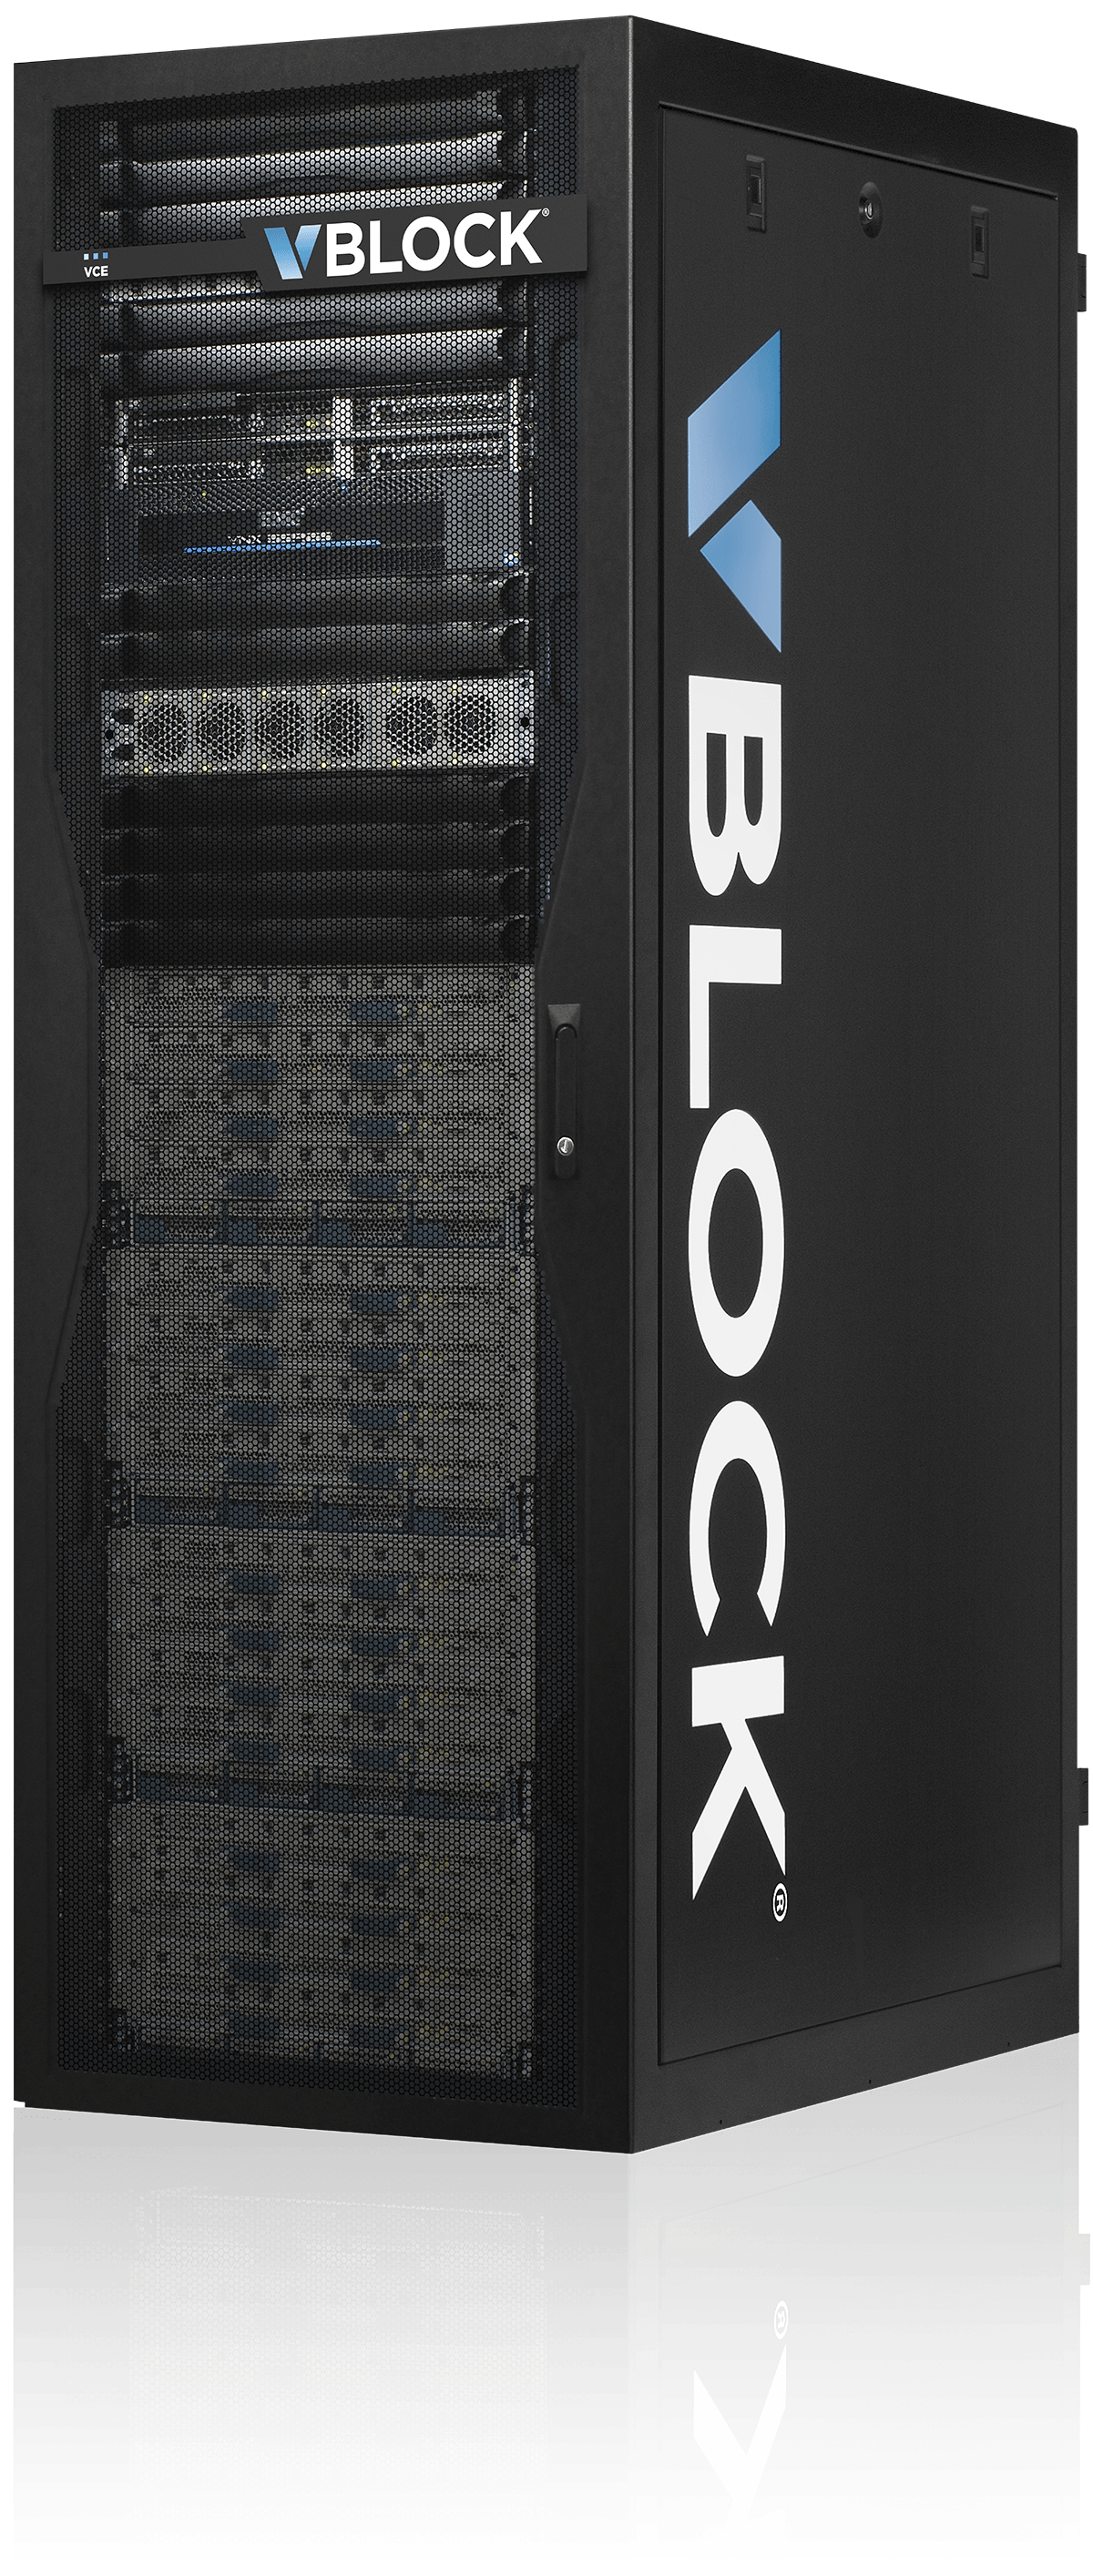 Vblock Logo - Vblock Innovation Continues with All Flash Storage